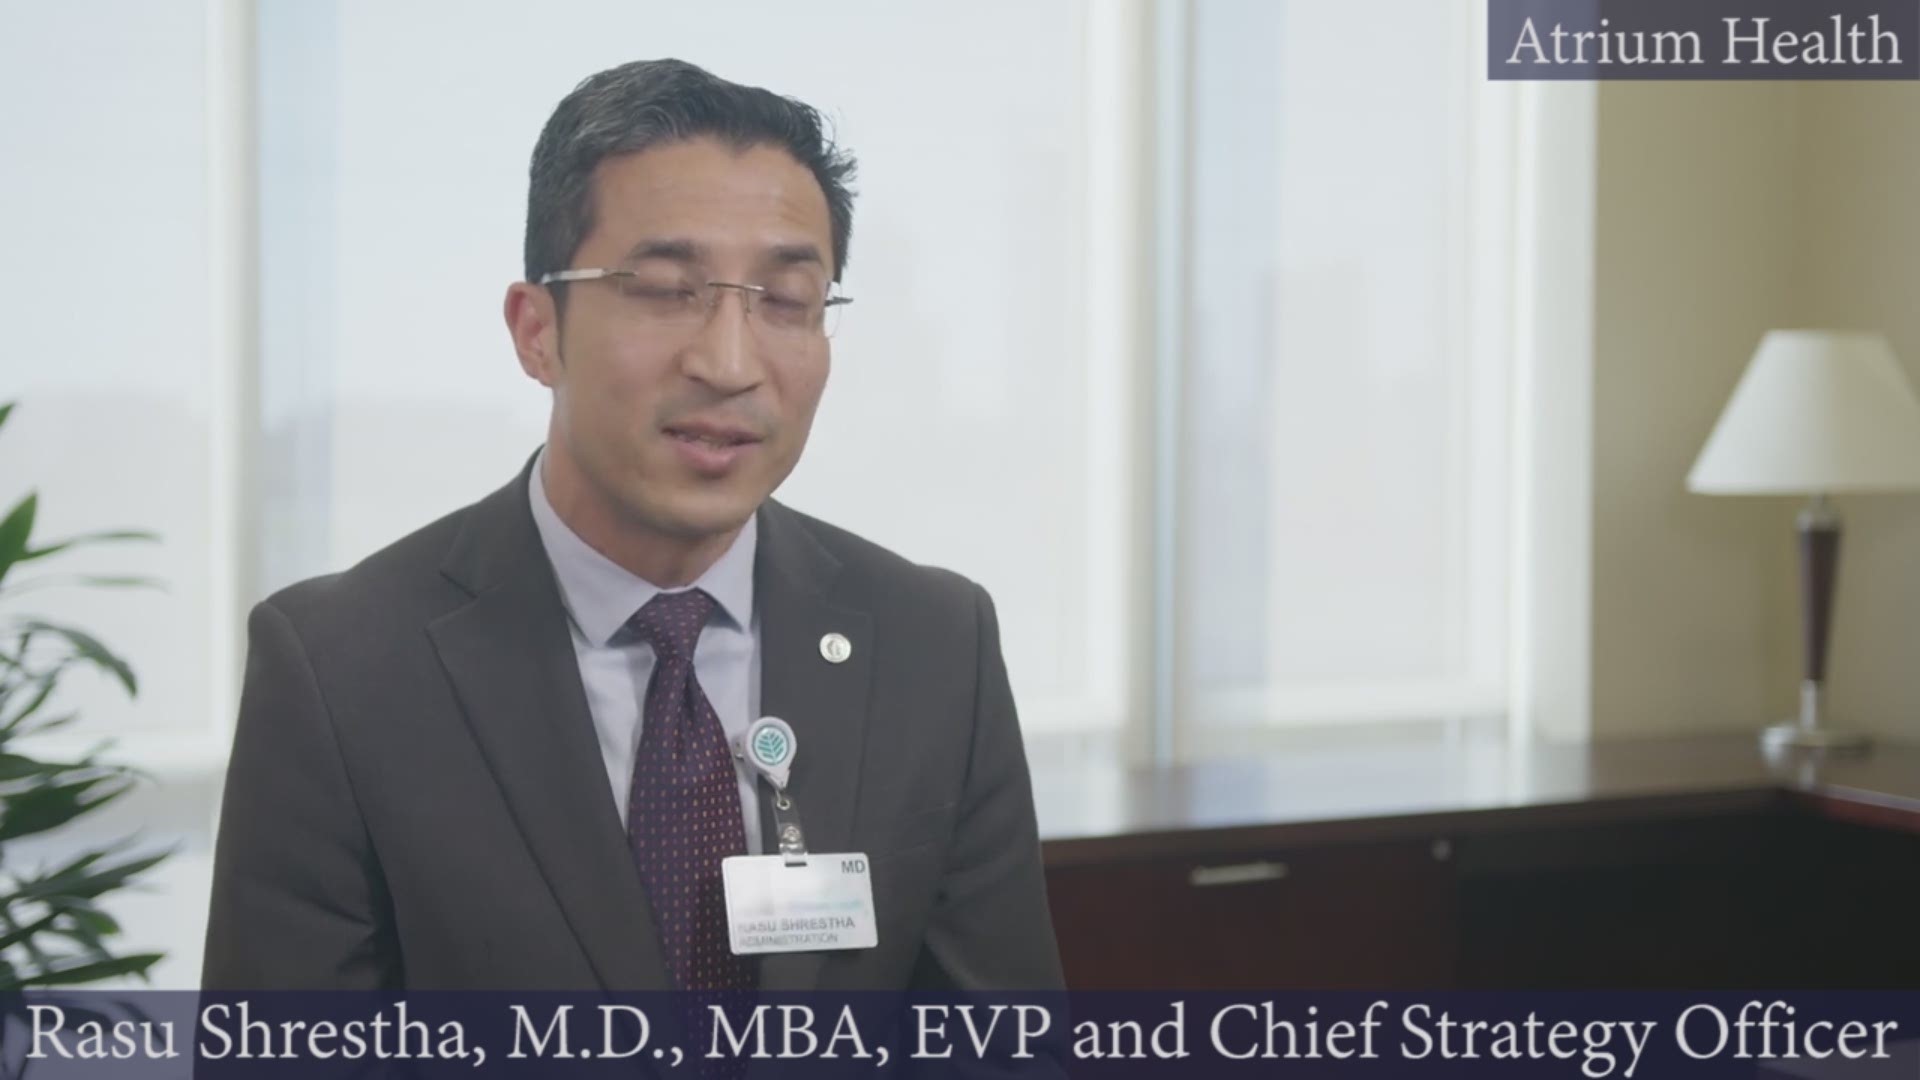 “Voice is an interactive technology that our patients are already using in many aspects of their lives," said Rasu Shrestha, M.D., MBA, EVP and Chief Strategy Officer at Atrium Health.